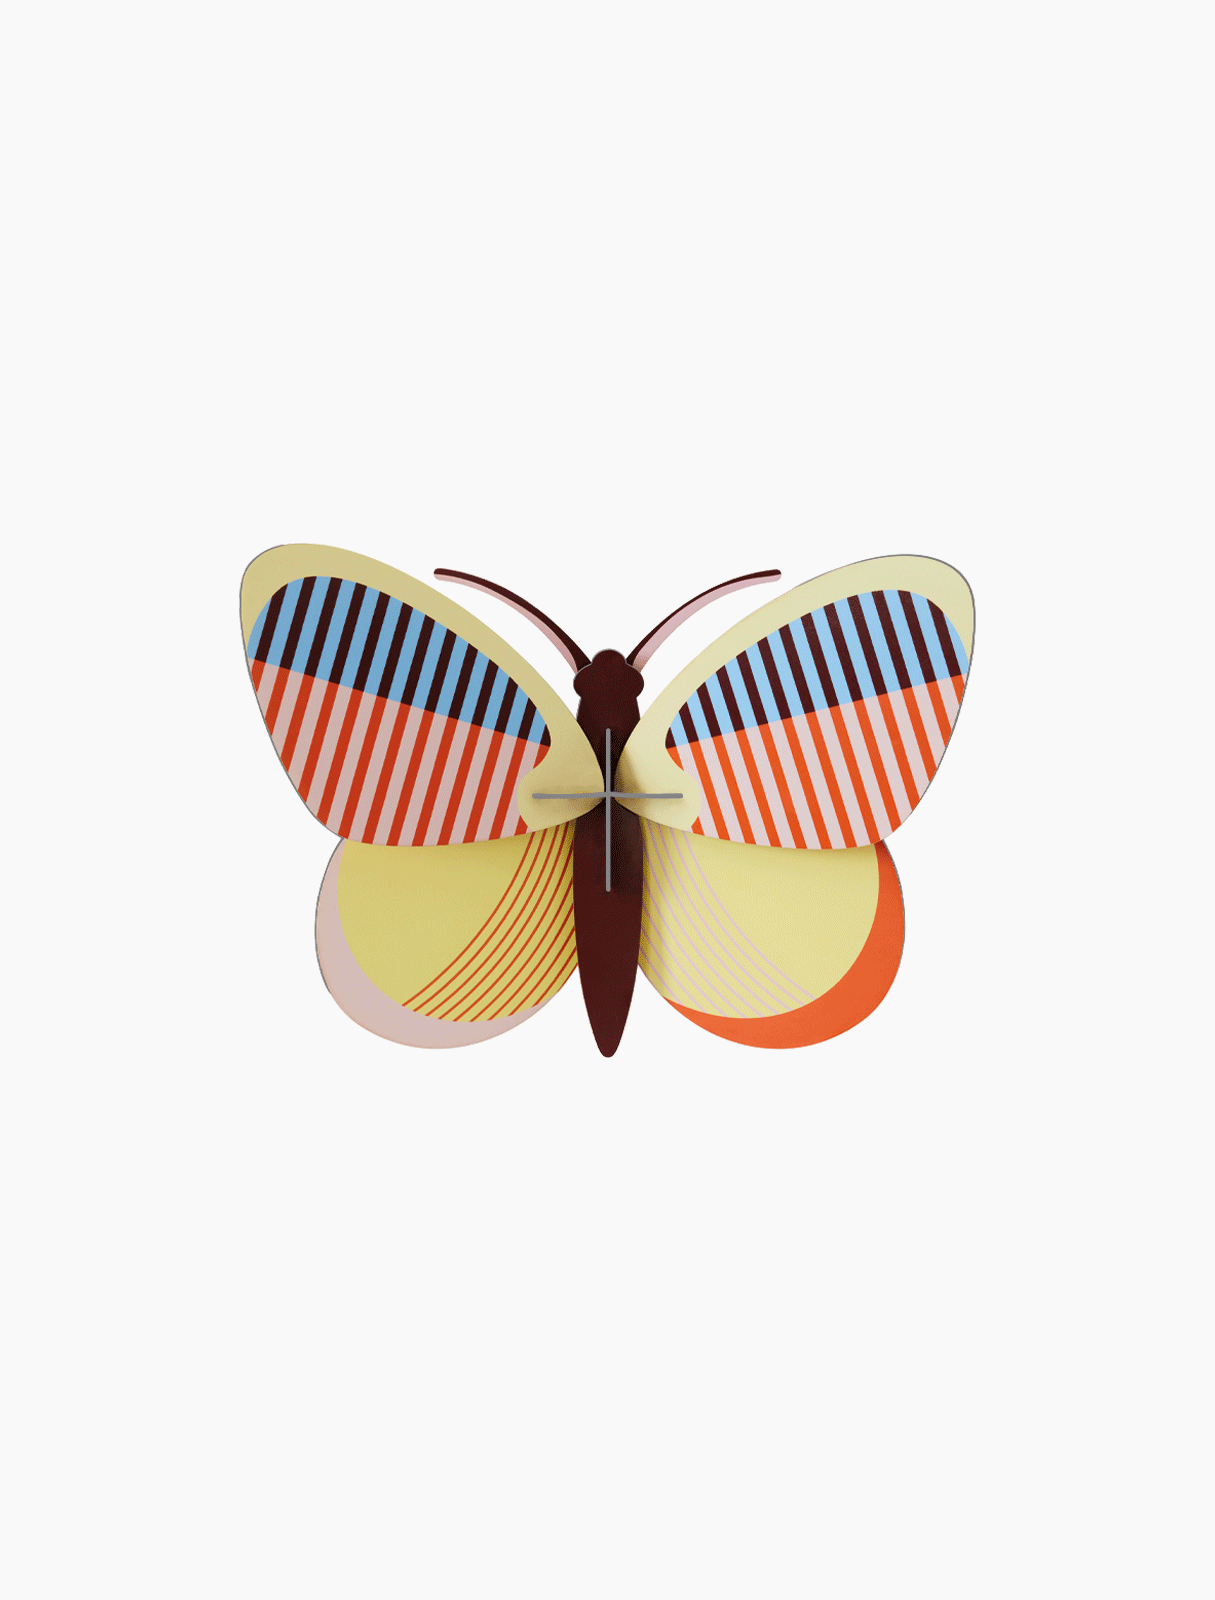 Studio Roof - Medium Insects - Sia Butterfly